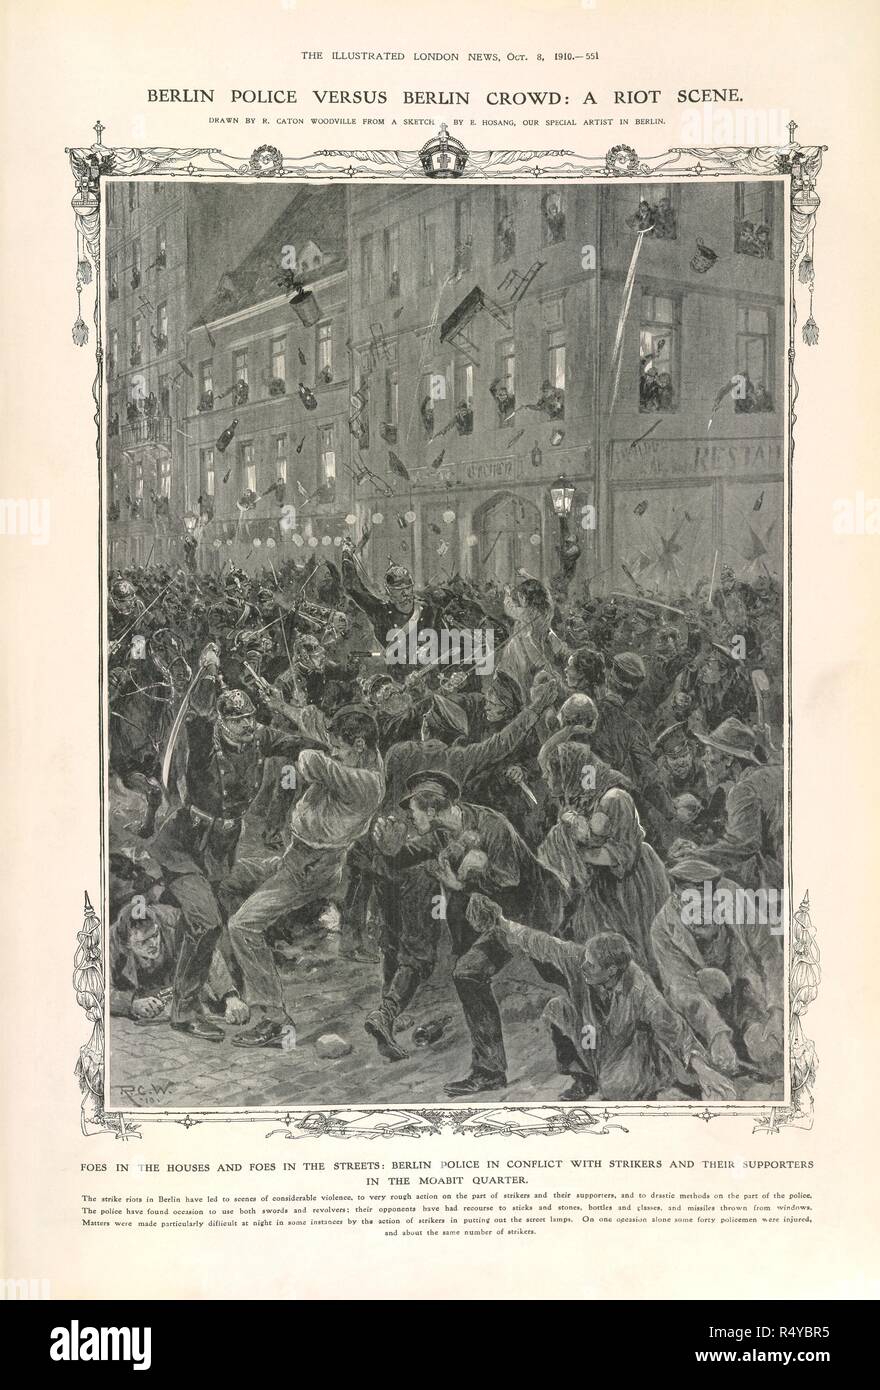 Berlin Police versus Berlin crowd: a riot scene. Illustrated London News. 8th October 1910. Source: Colindale, 551. Language: English. Author: Caton Woodville, R. Stock Photo